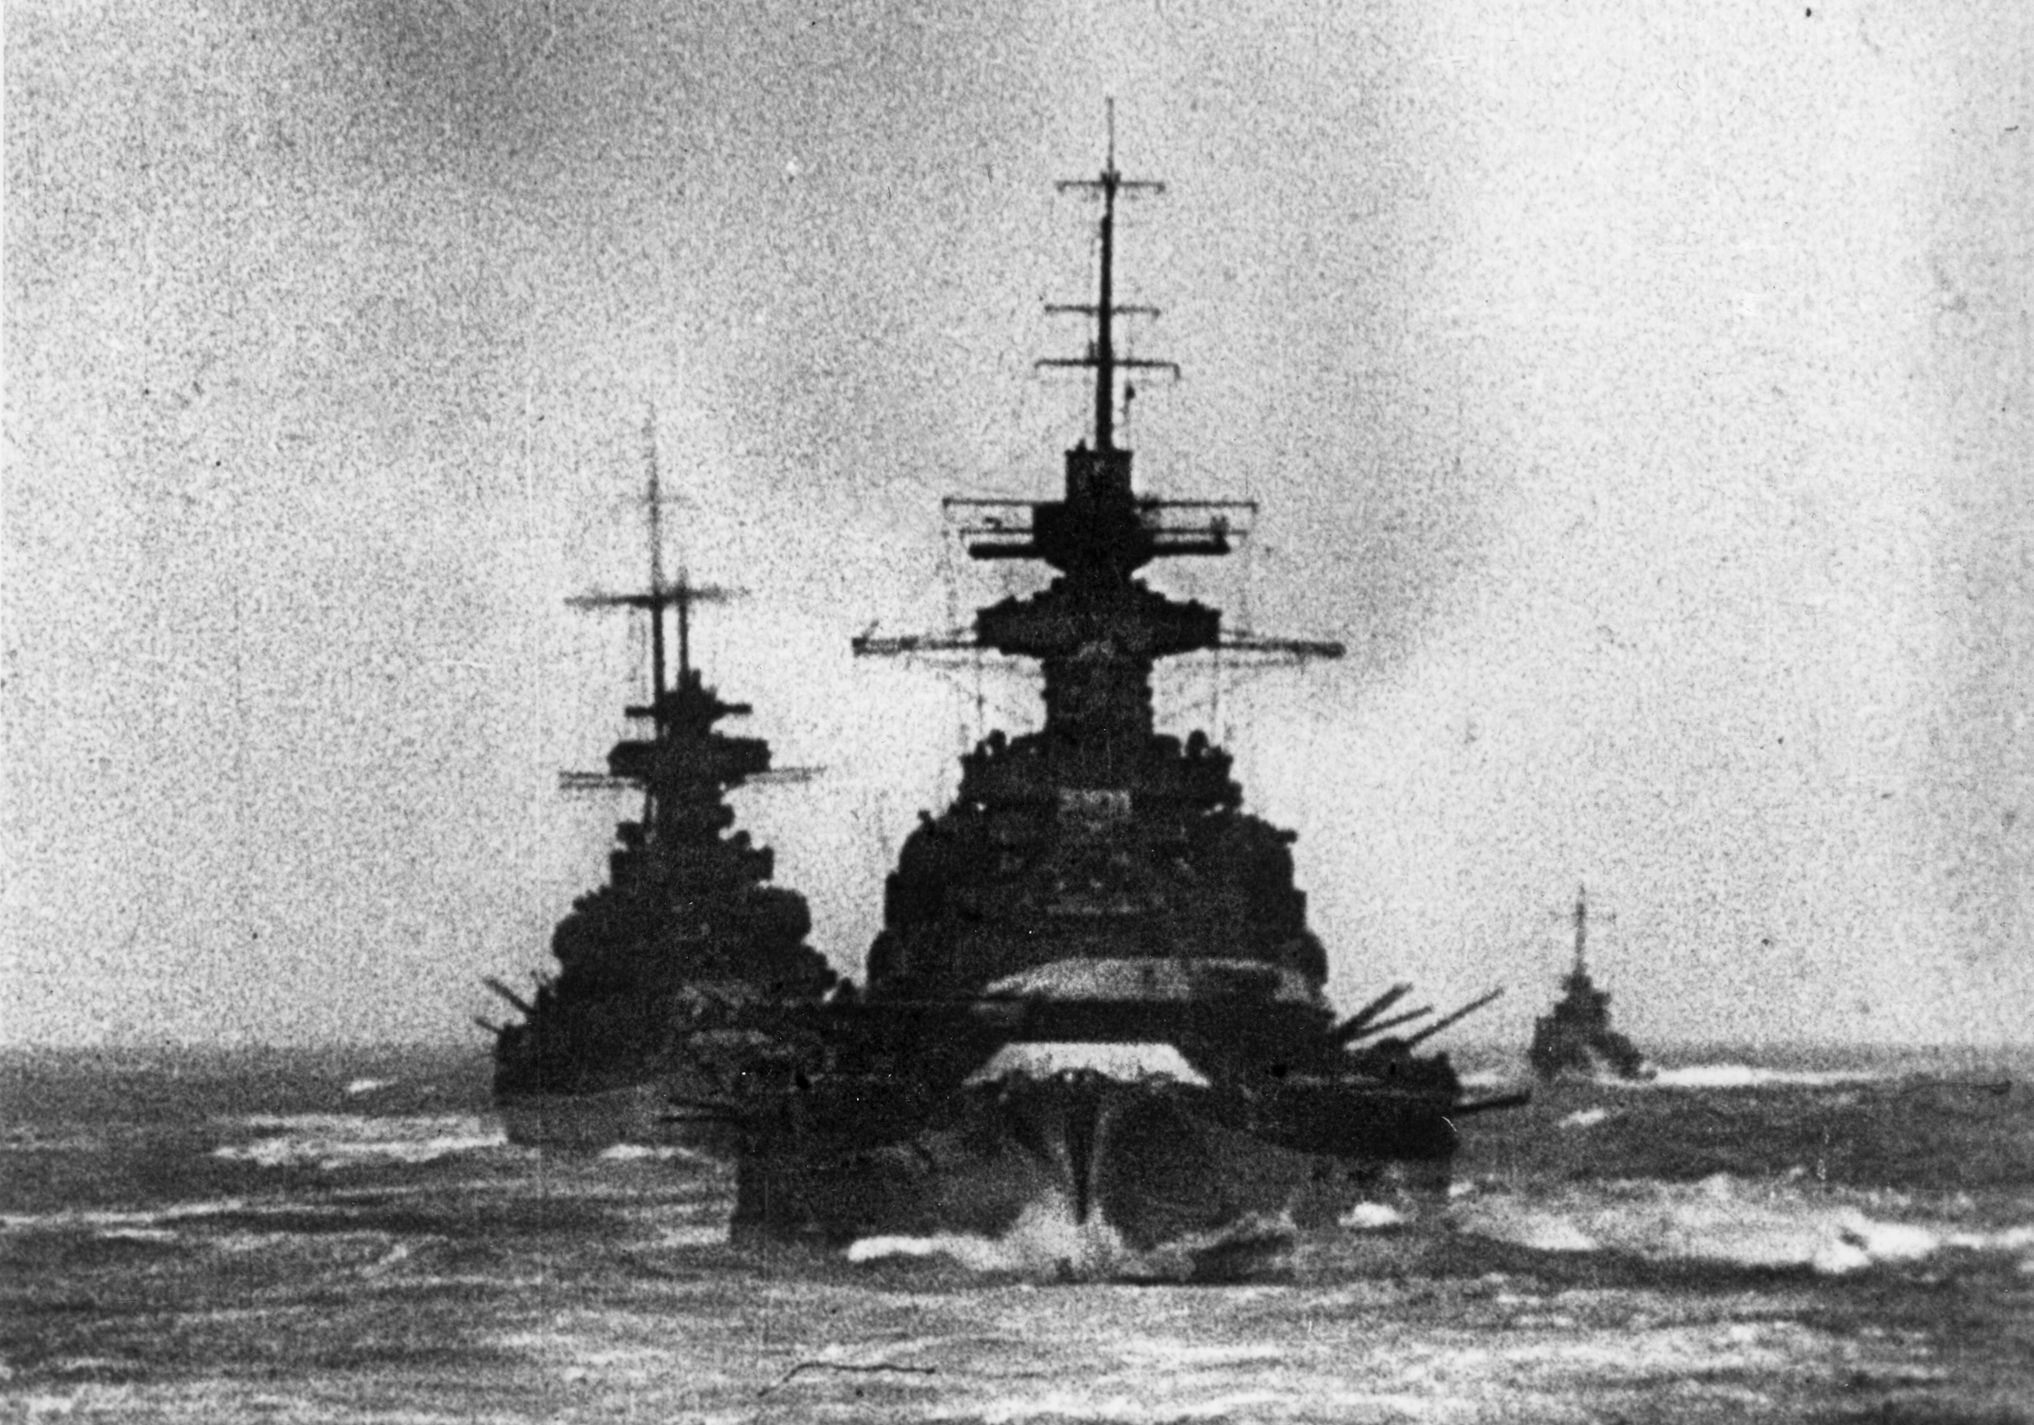 The German battlecruisers Scharnhorst and Gneisenau sail in line while firing their main batteries. This photo is believed to have been taken during Operation Cerberus, the “Channel Dash” of February 1942, during which the warships departed the French port of Brest and arrived in Germany at the port of Wilhelmshaven. They were damaged by magnetic mines during the hazardous journey, but British efforts to sink them outright, along with the heavy cruiser Prinz Eugen, proved futile.